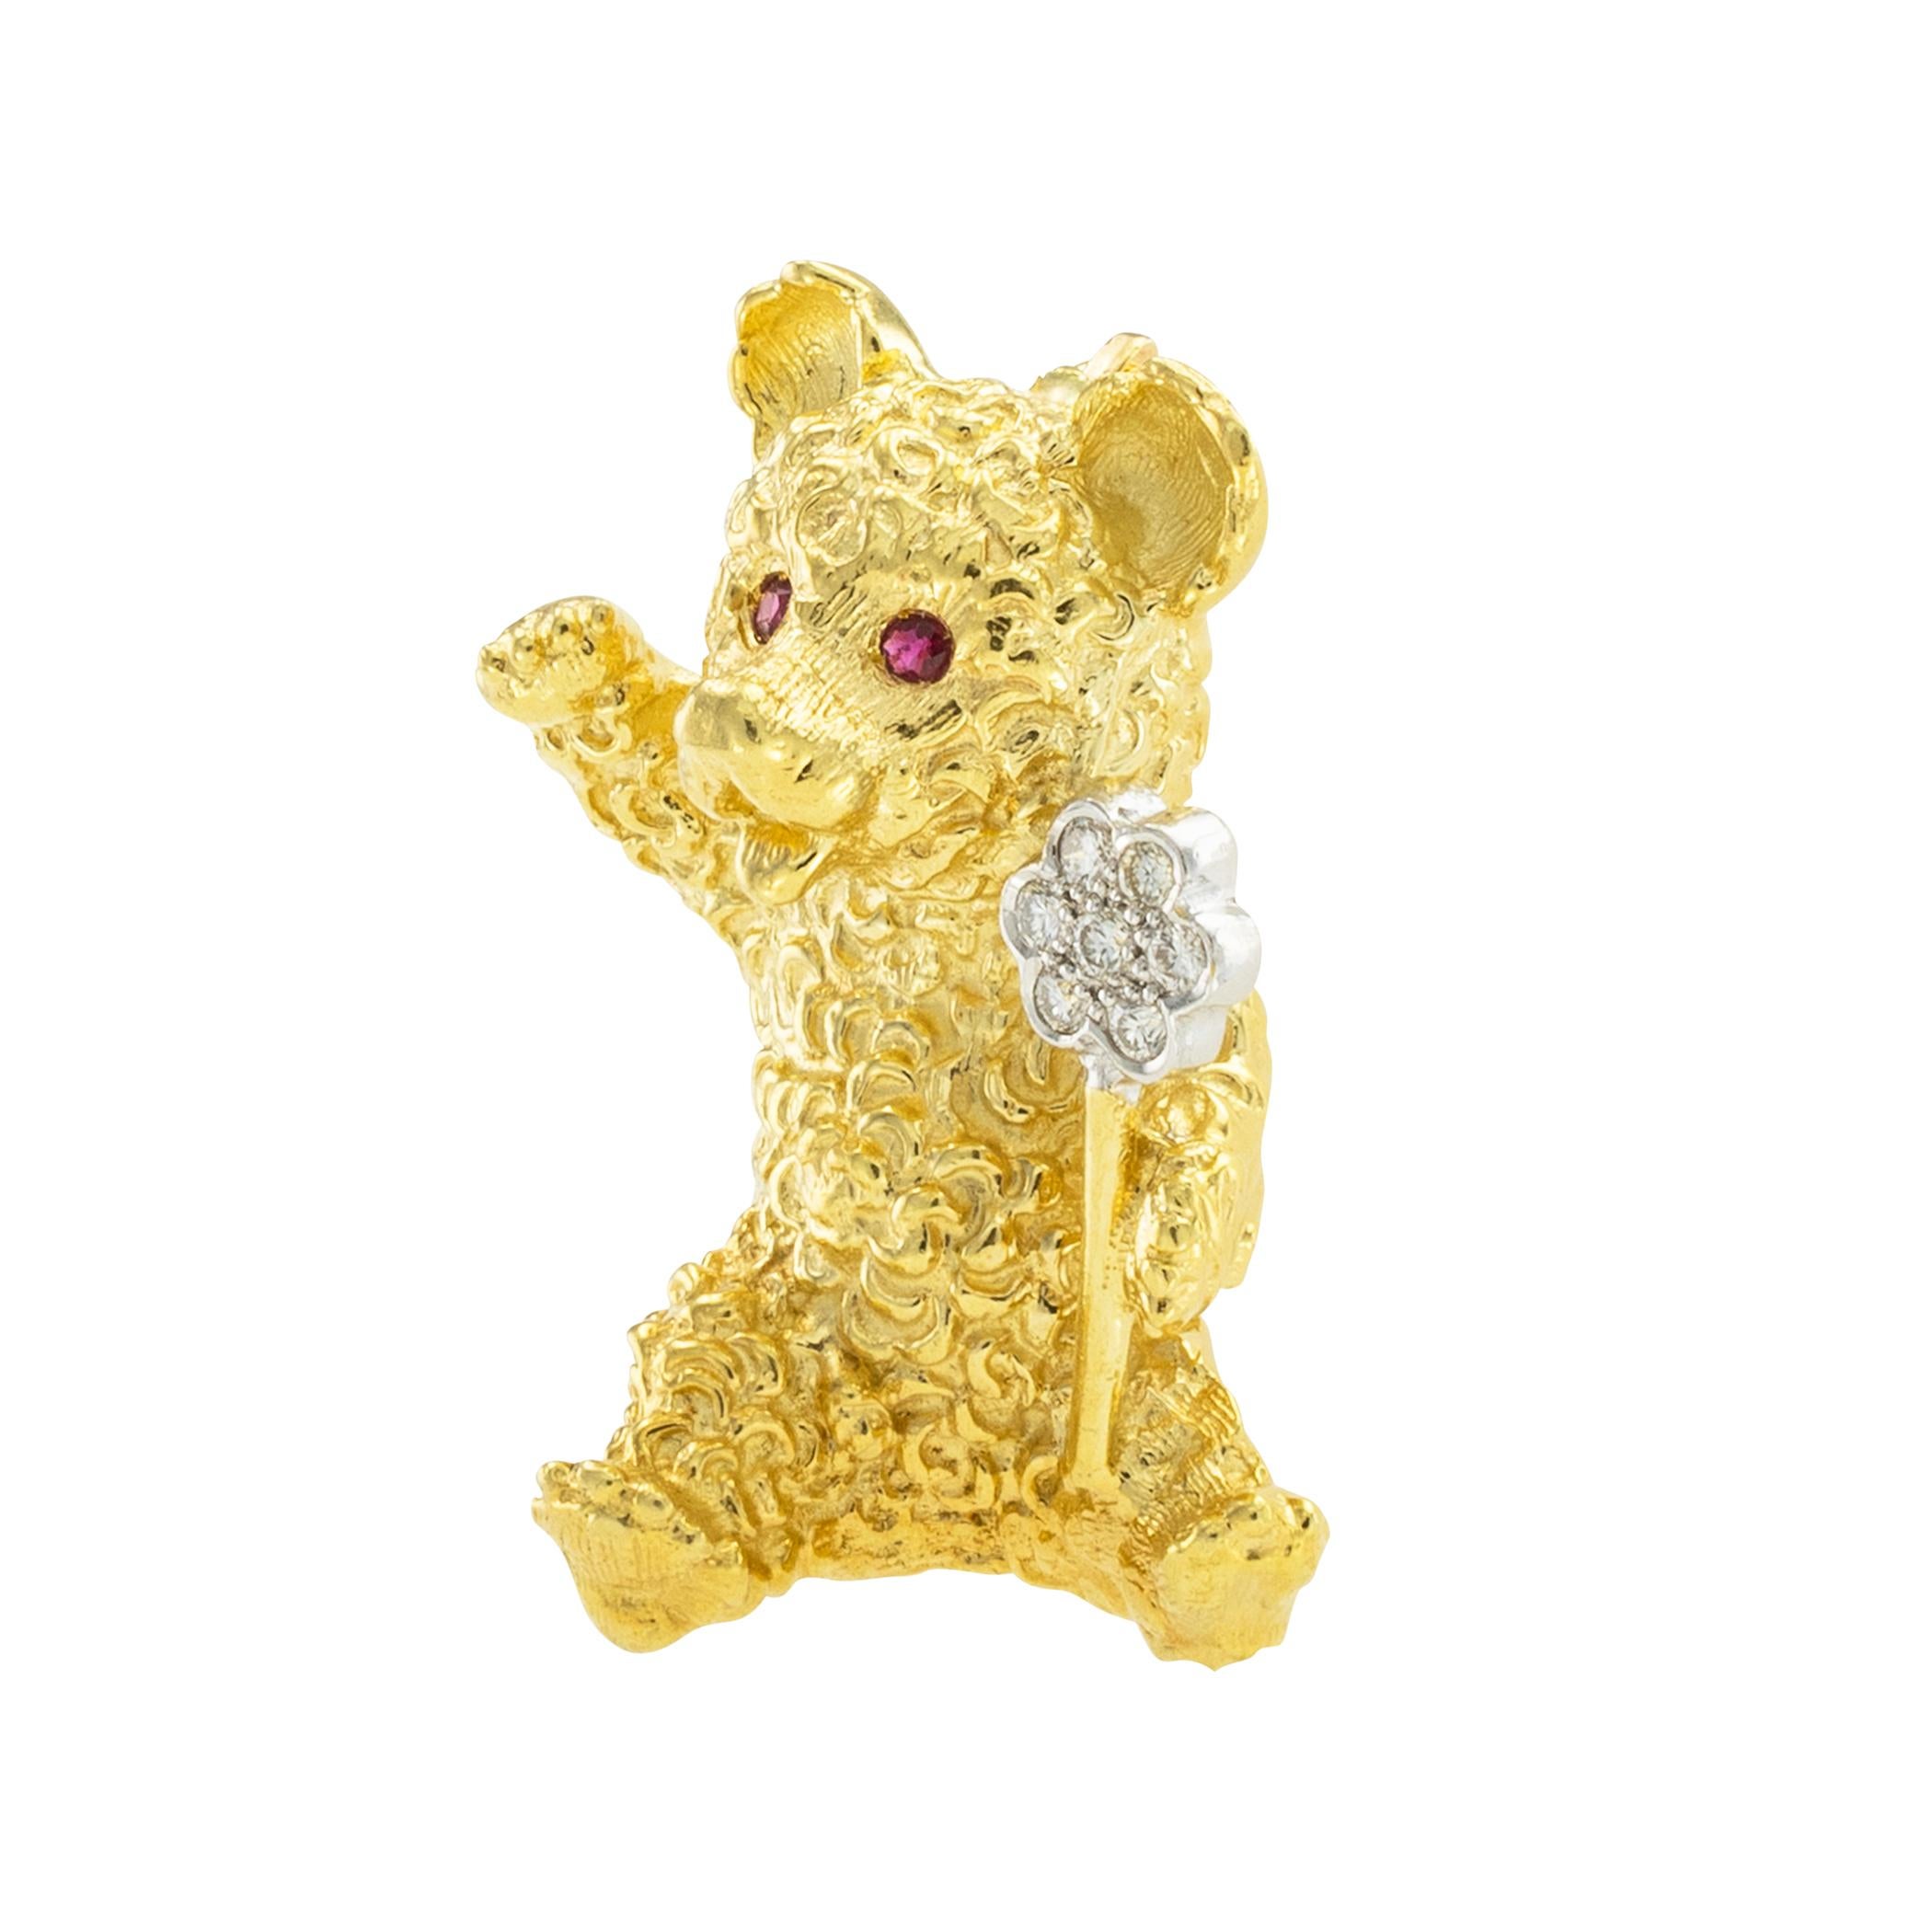  Diamond and ruby gold Italian teddy bear brooch circa 1970.  *

ABOUT THIS ITEM:  #P-DJ29A. Scroll down for detailed specifications. Take a glance at this adorable teddy bear, it's a true work of art that you can wear. You can see love and